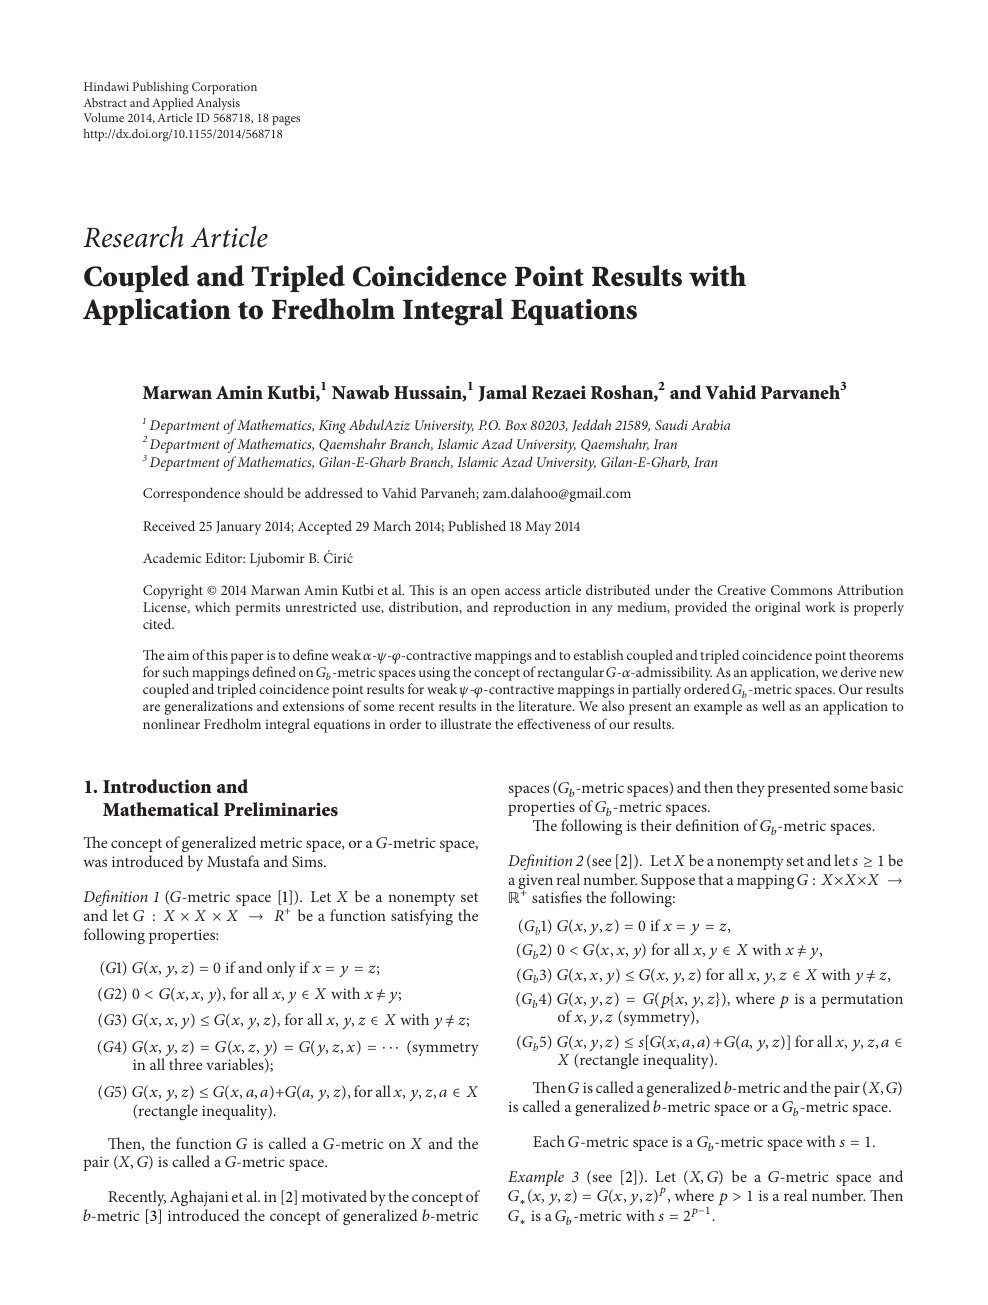 Coupled And Tripled Coincidence Point Results With Application To Fredholm Integral Equations Topic Of Research Paper In Mathematics Download Scholarly Article Pdf And Read For Free On Cyberleninka Open Science Hub